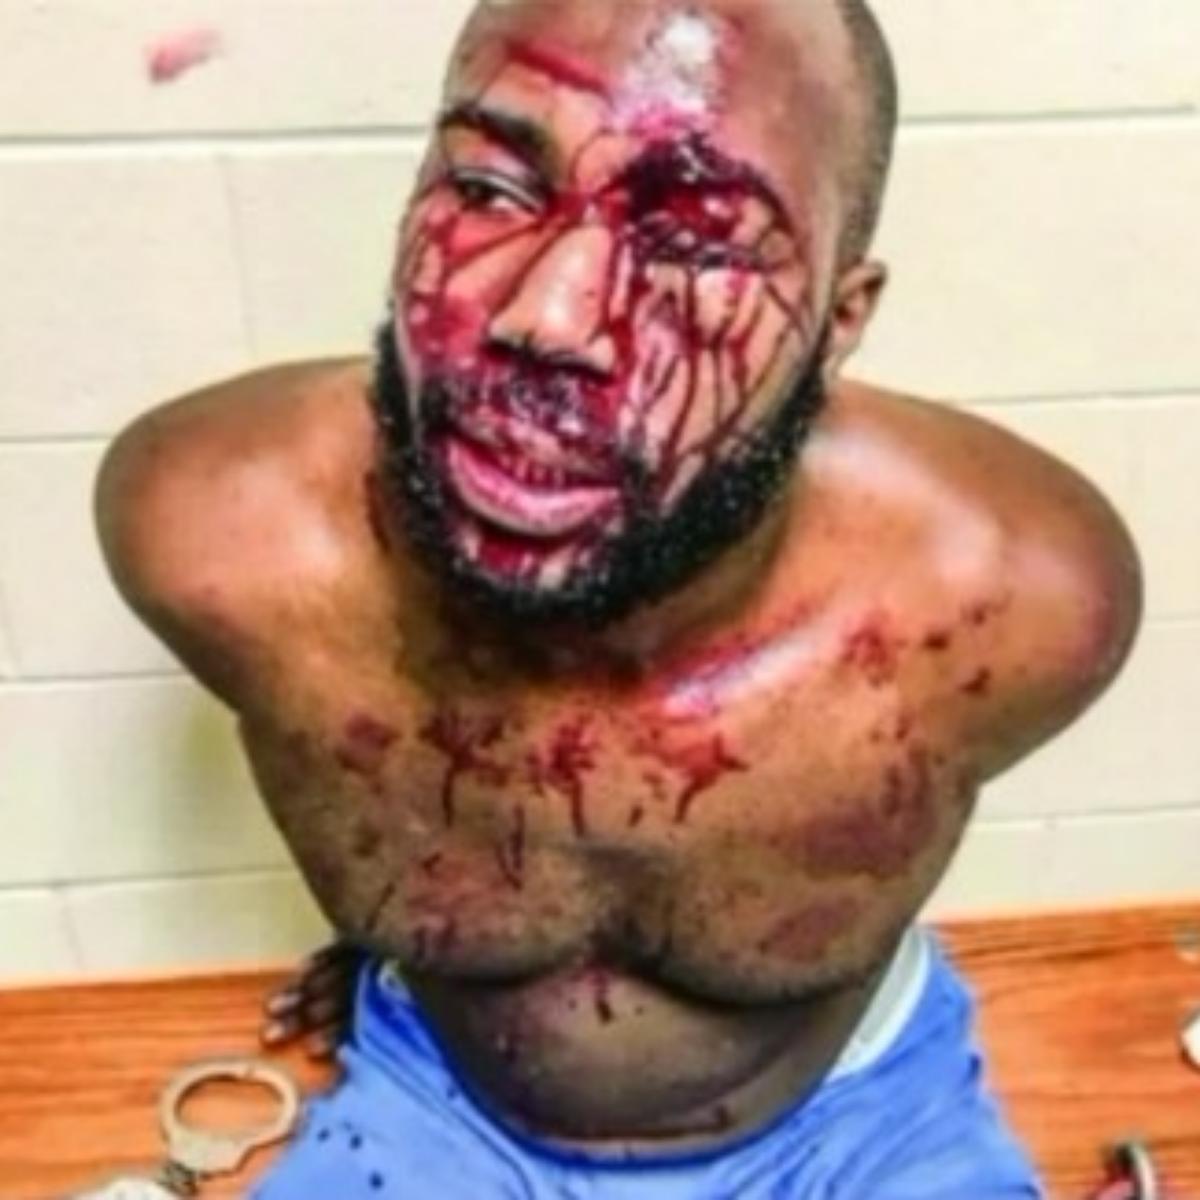 Mississippi Man Beaten By Police Officers Files $1 Million Lawsuit